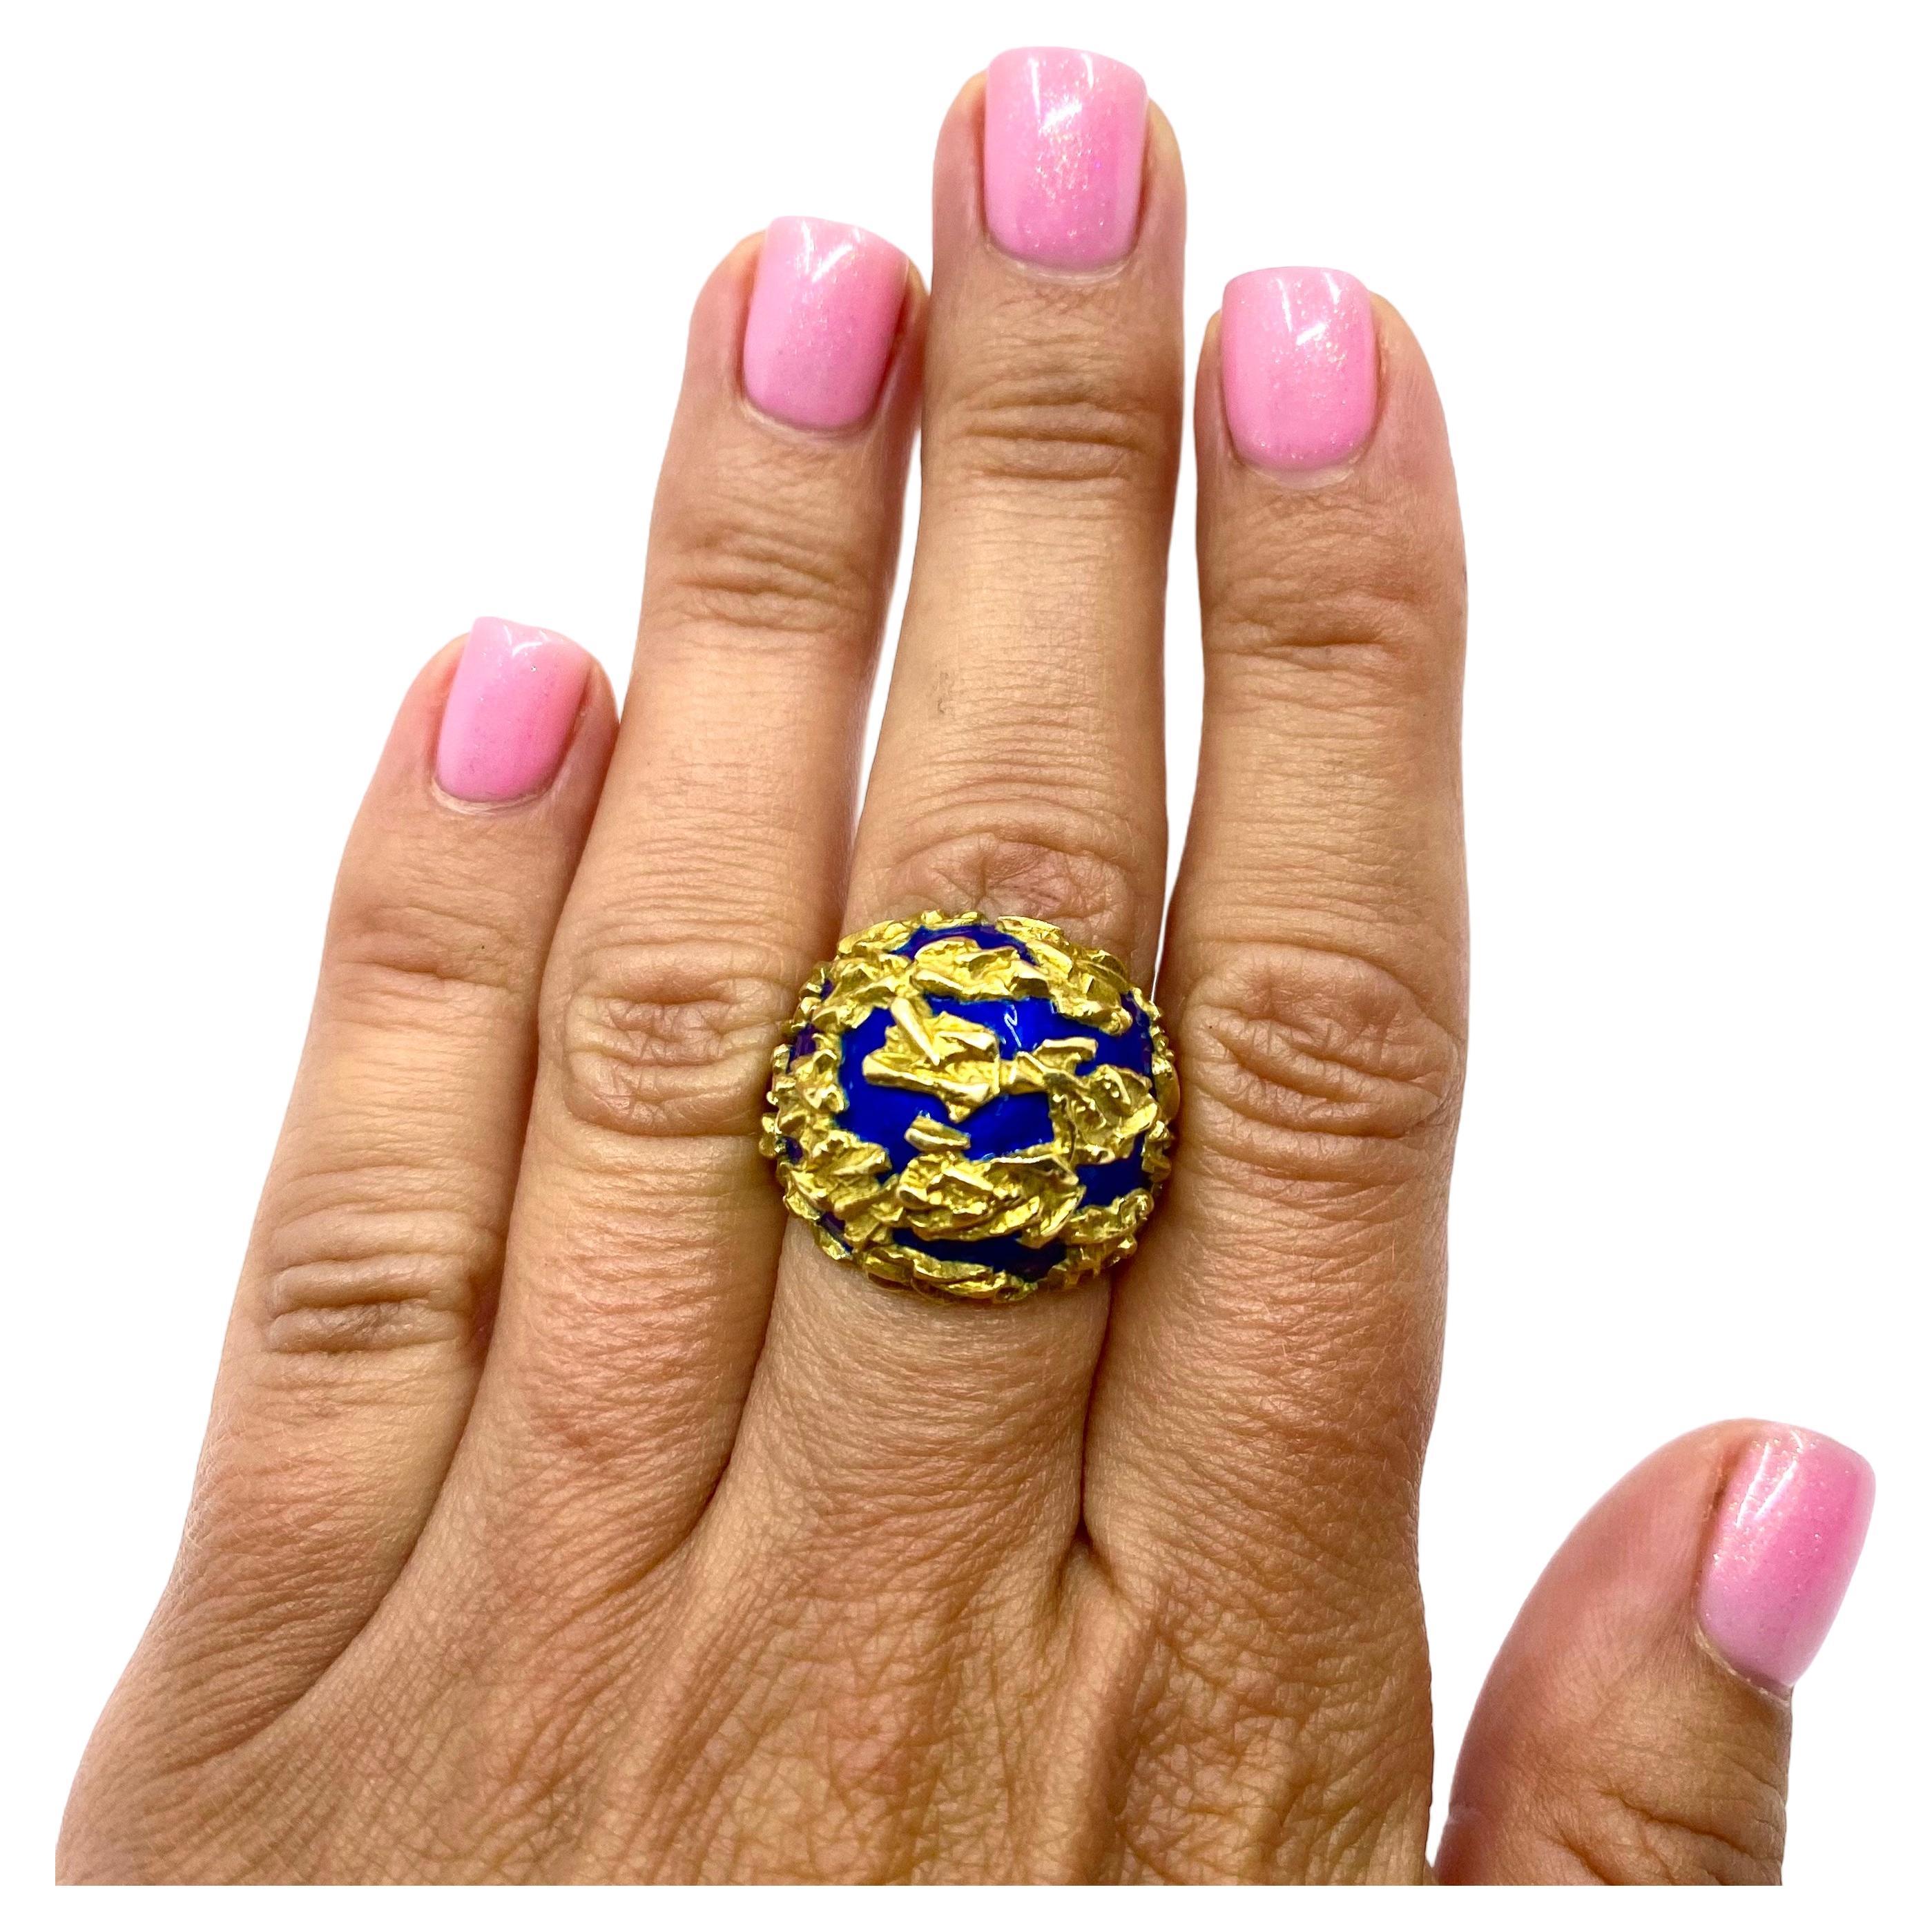 An eloquent Gubelin dome ring, made of 18k gold and blue enamel.
The ring has abstract design with textured gold splashes set on the enamel background. Brightness of enamel creates an appealing contrast with the gold’s hue. The shank is textured as